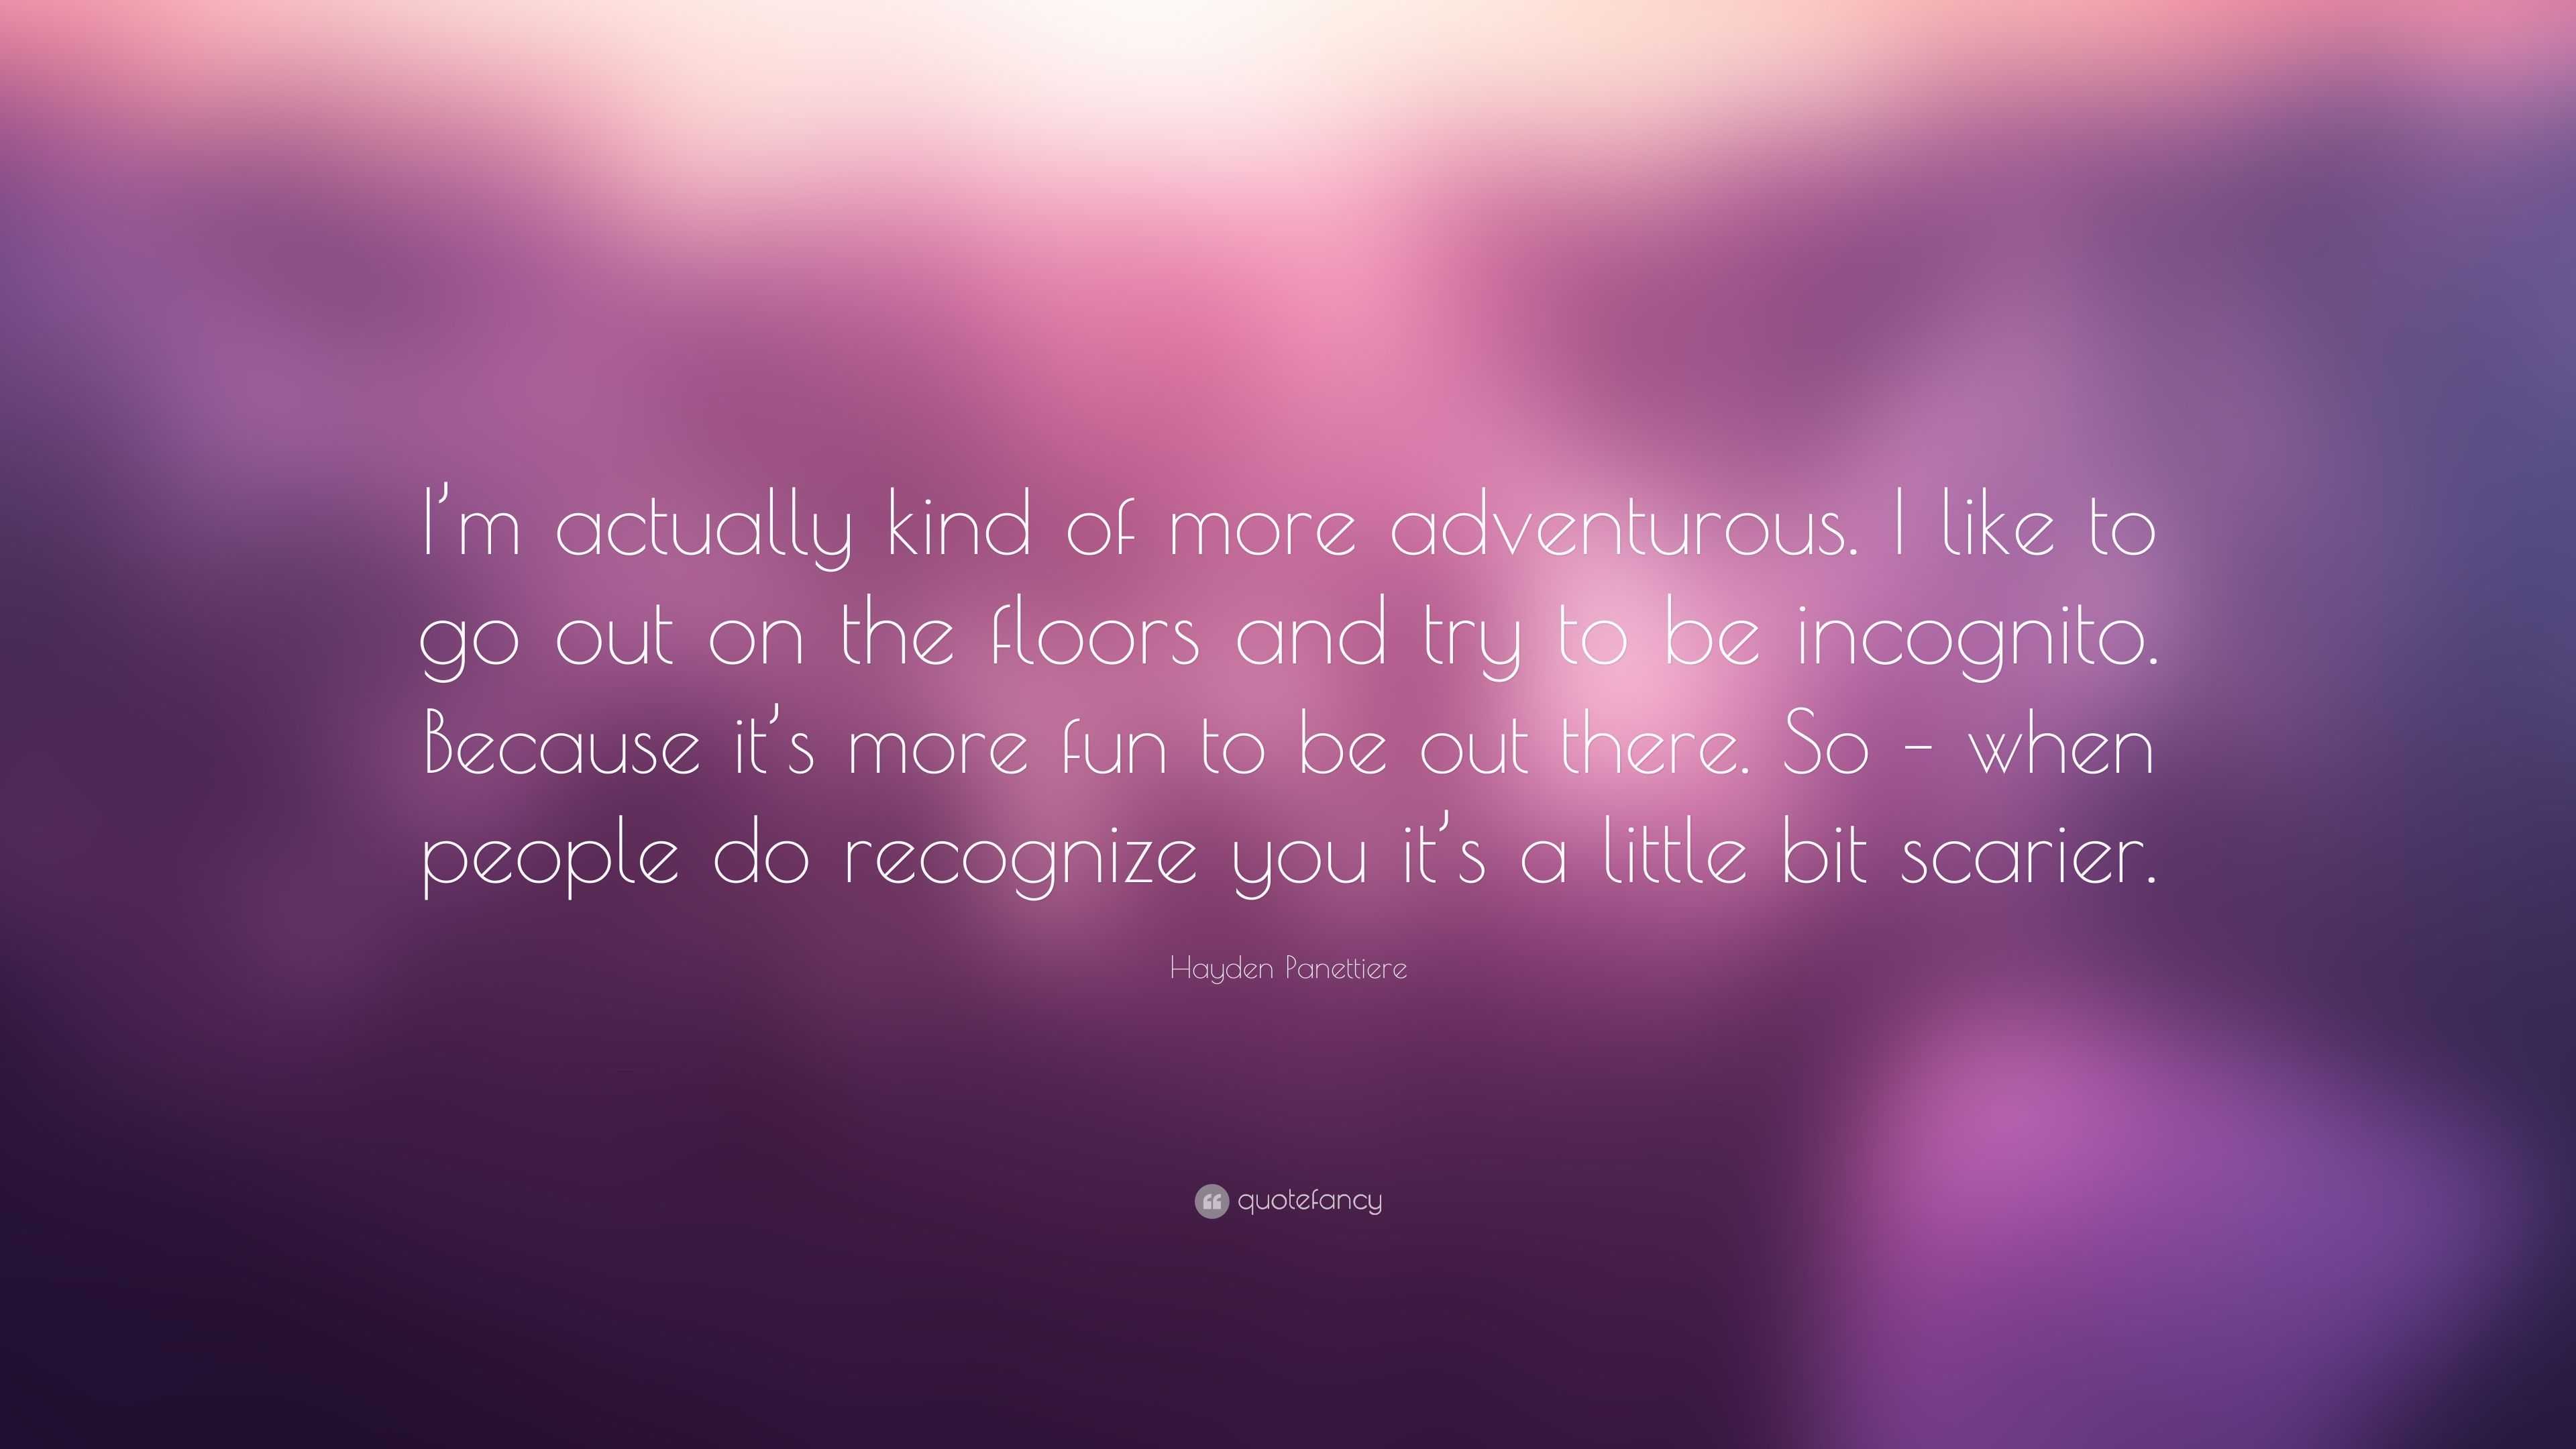 Hayden Panettiere Quote: “I’m actually kind of more adventurous. I like ...